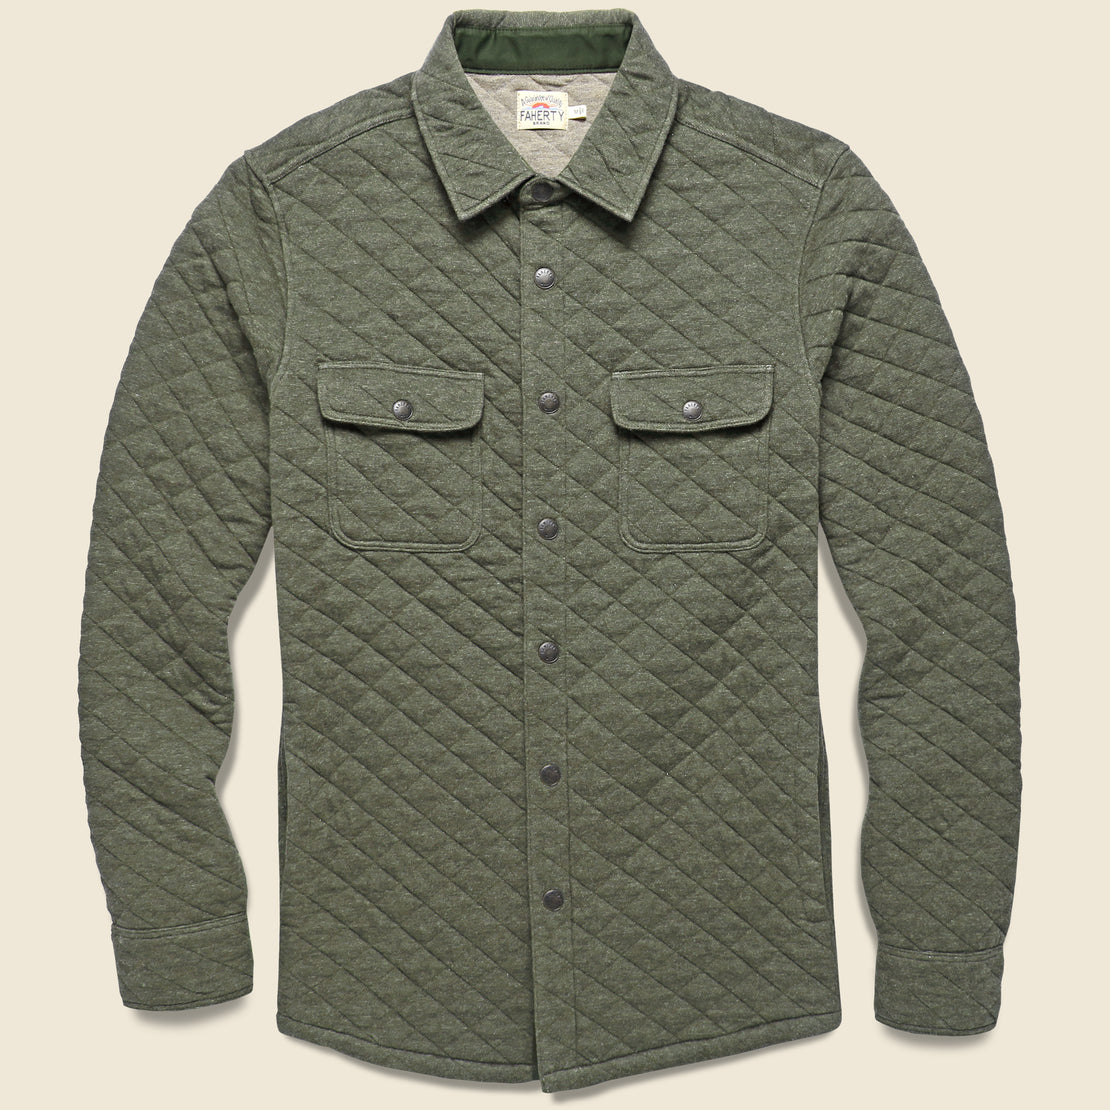 Faherty Epic Quilted Fleece CPO Shirt Jacket - Olive Melange